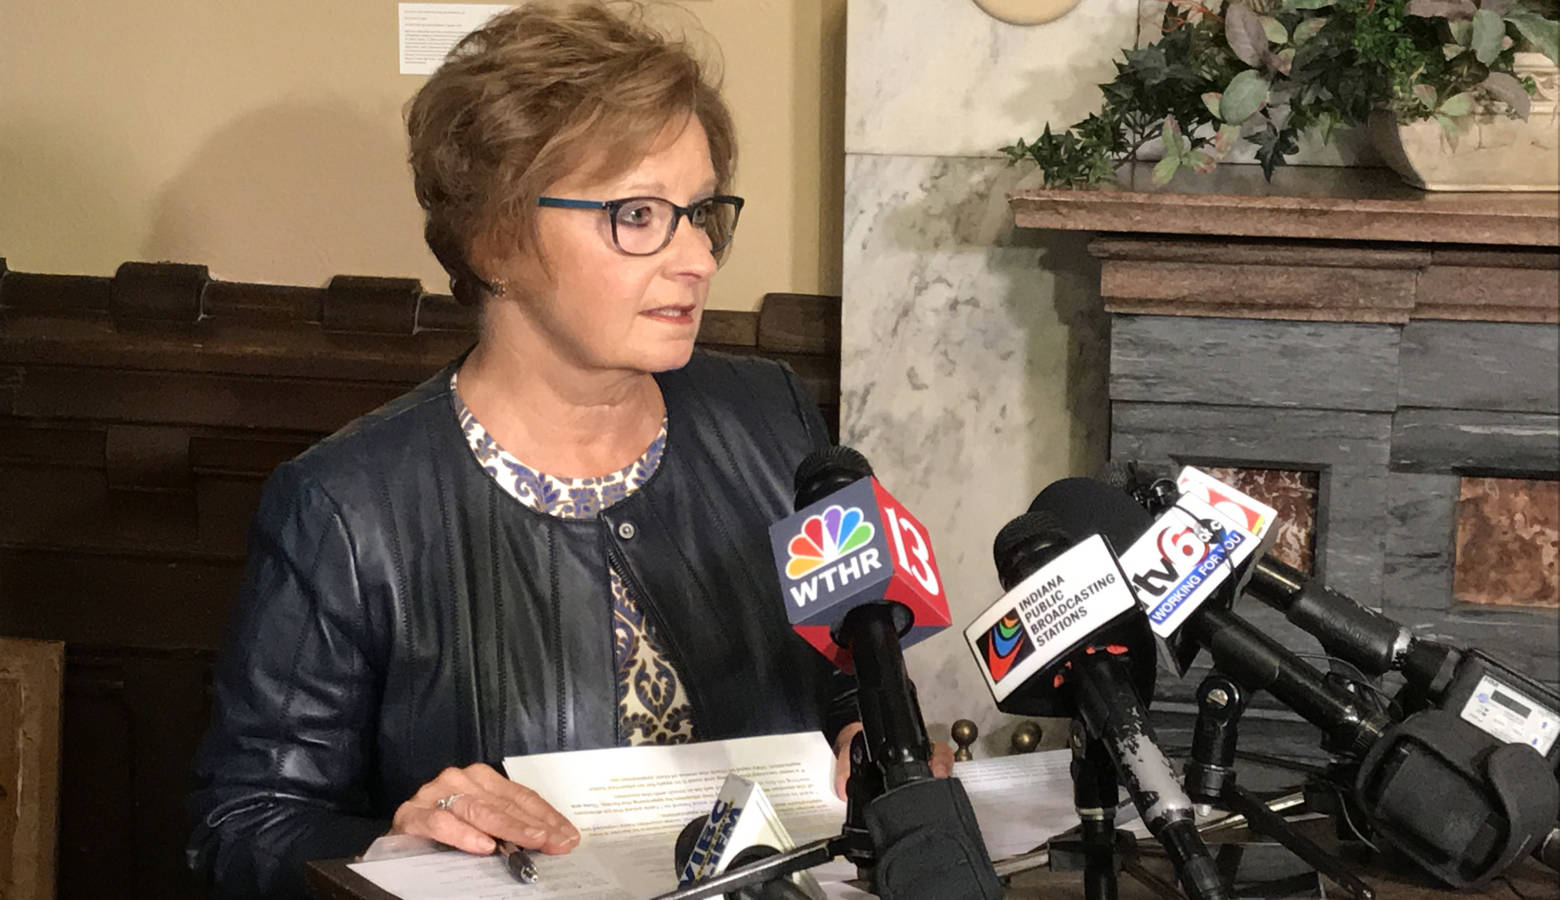 Indiana Secretary of State Connie Lawson says the state Democratic Party mistakenly sent out potentially thousands of faulty absentee ballot applications. (Brandon Smith/IPB News)